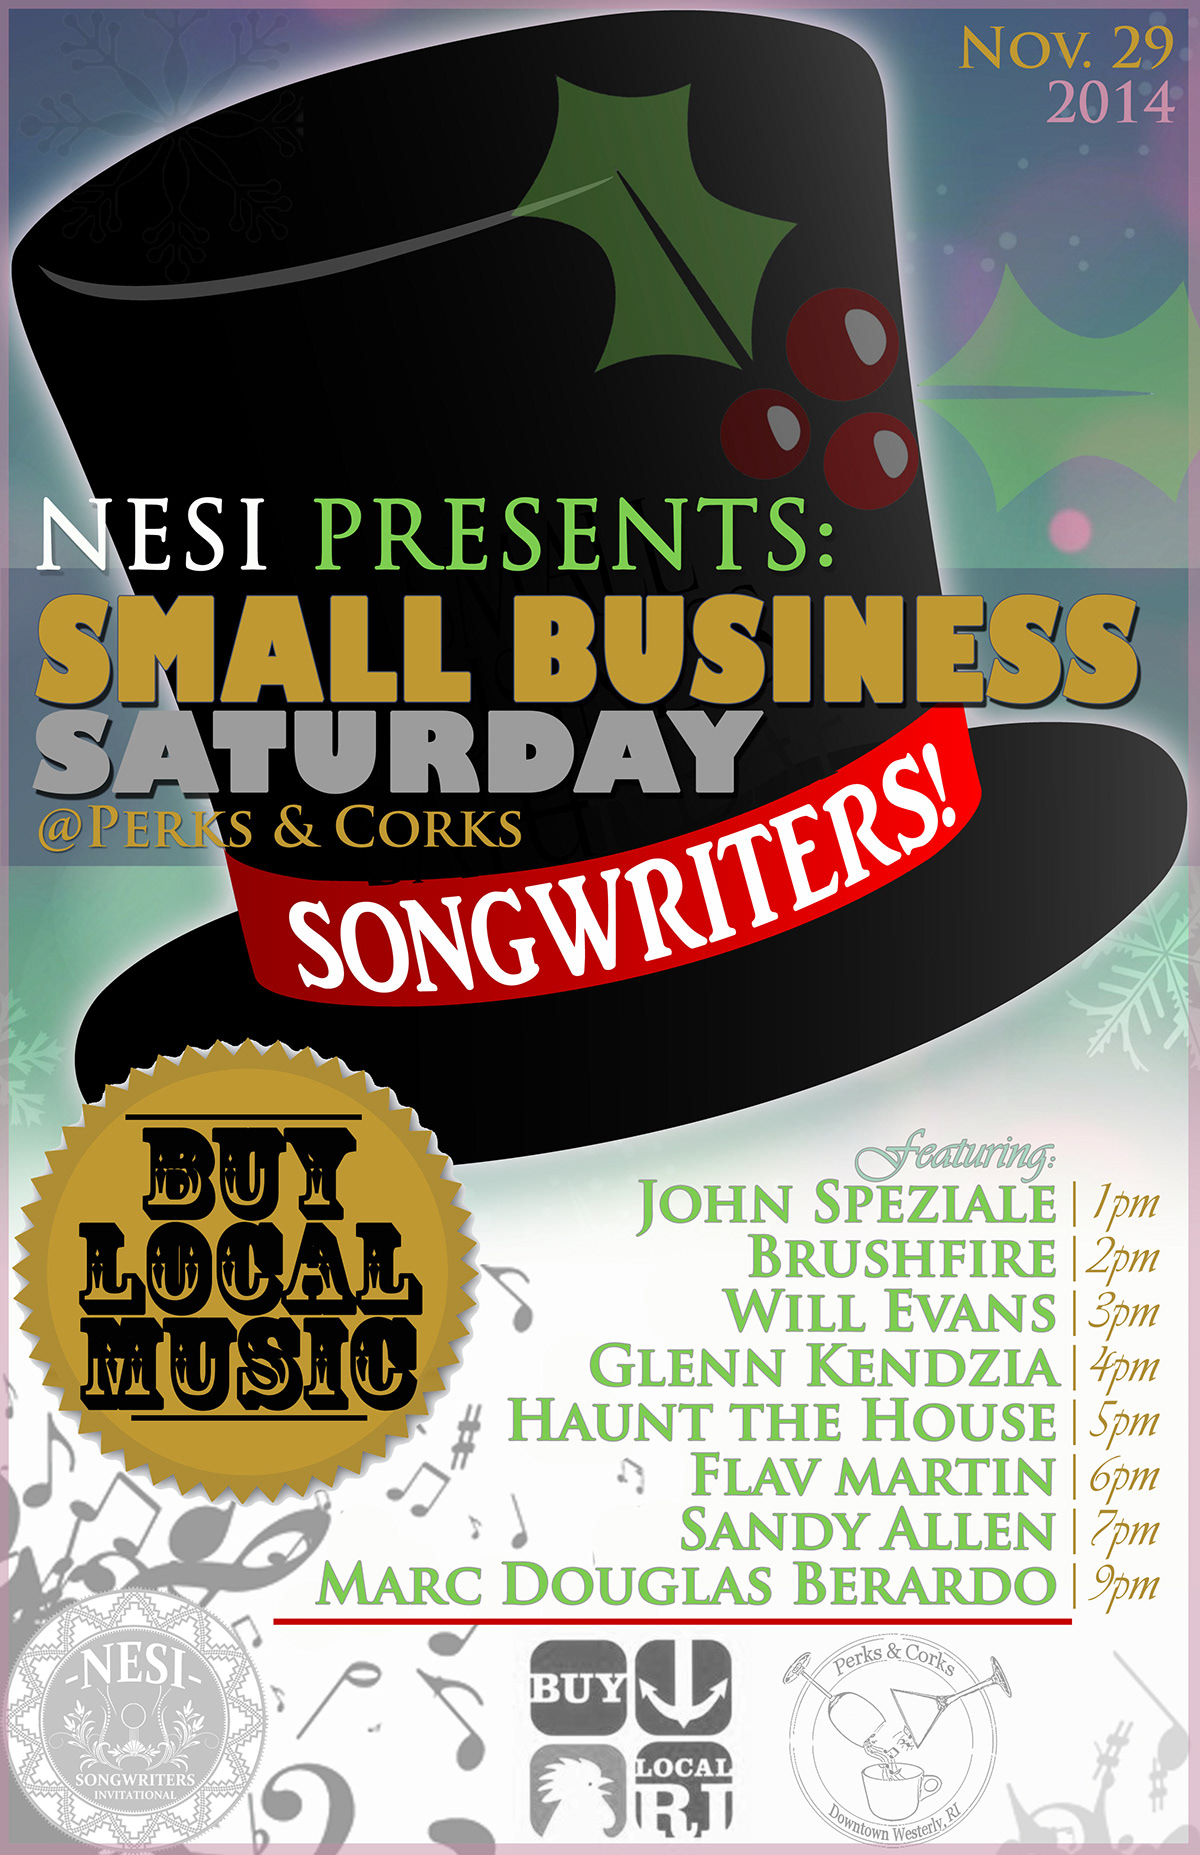 nesi songwriters local Promotion Events